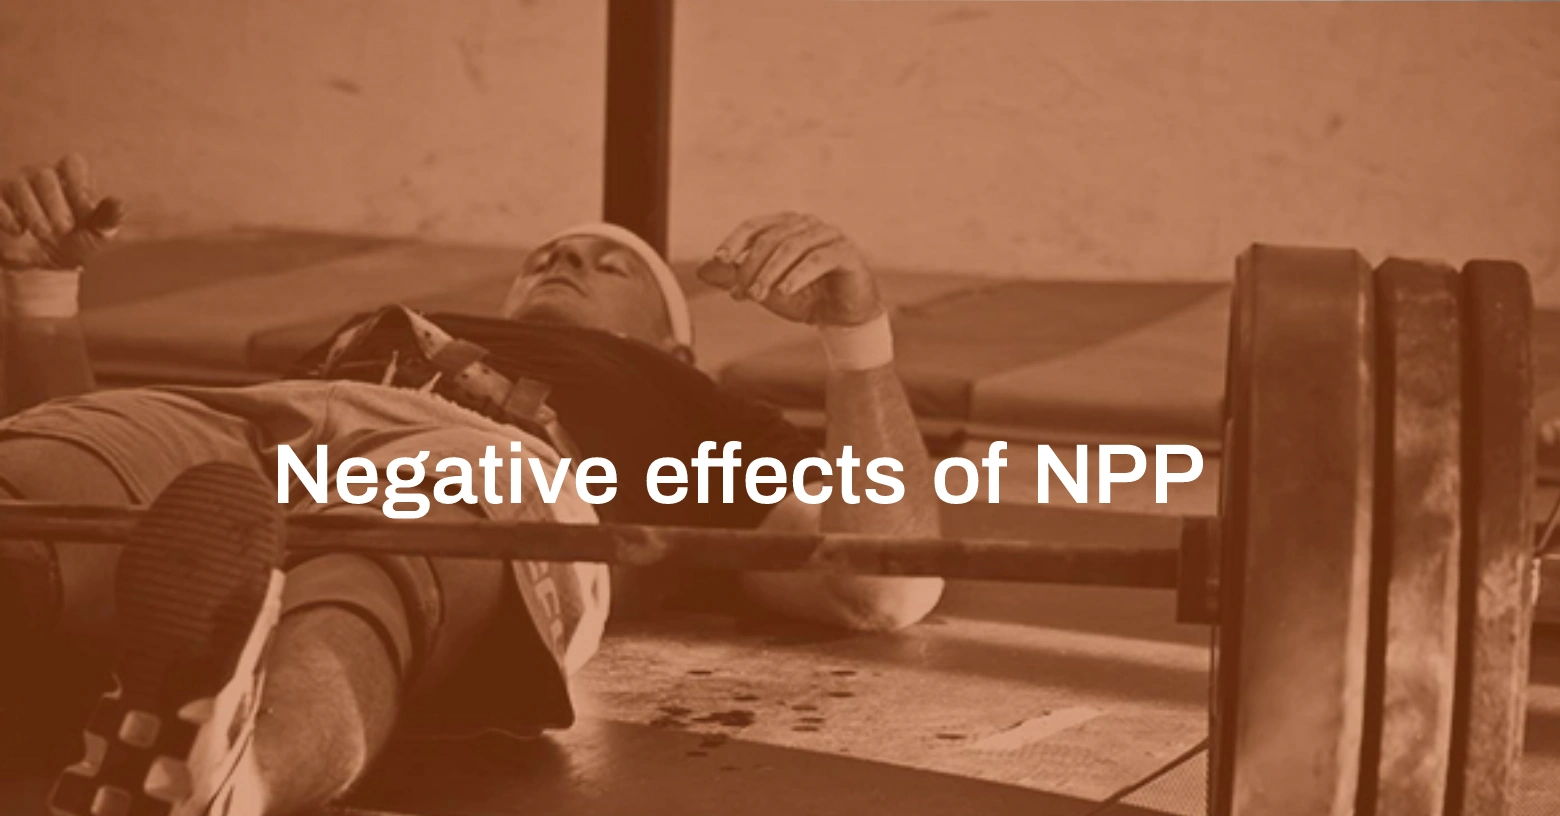 Negative effects of NPP